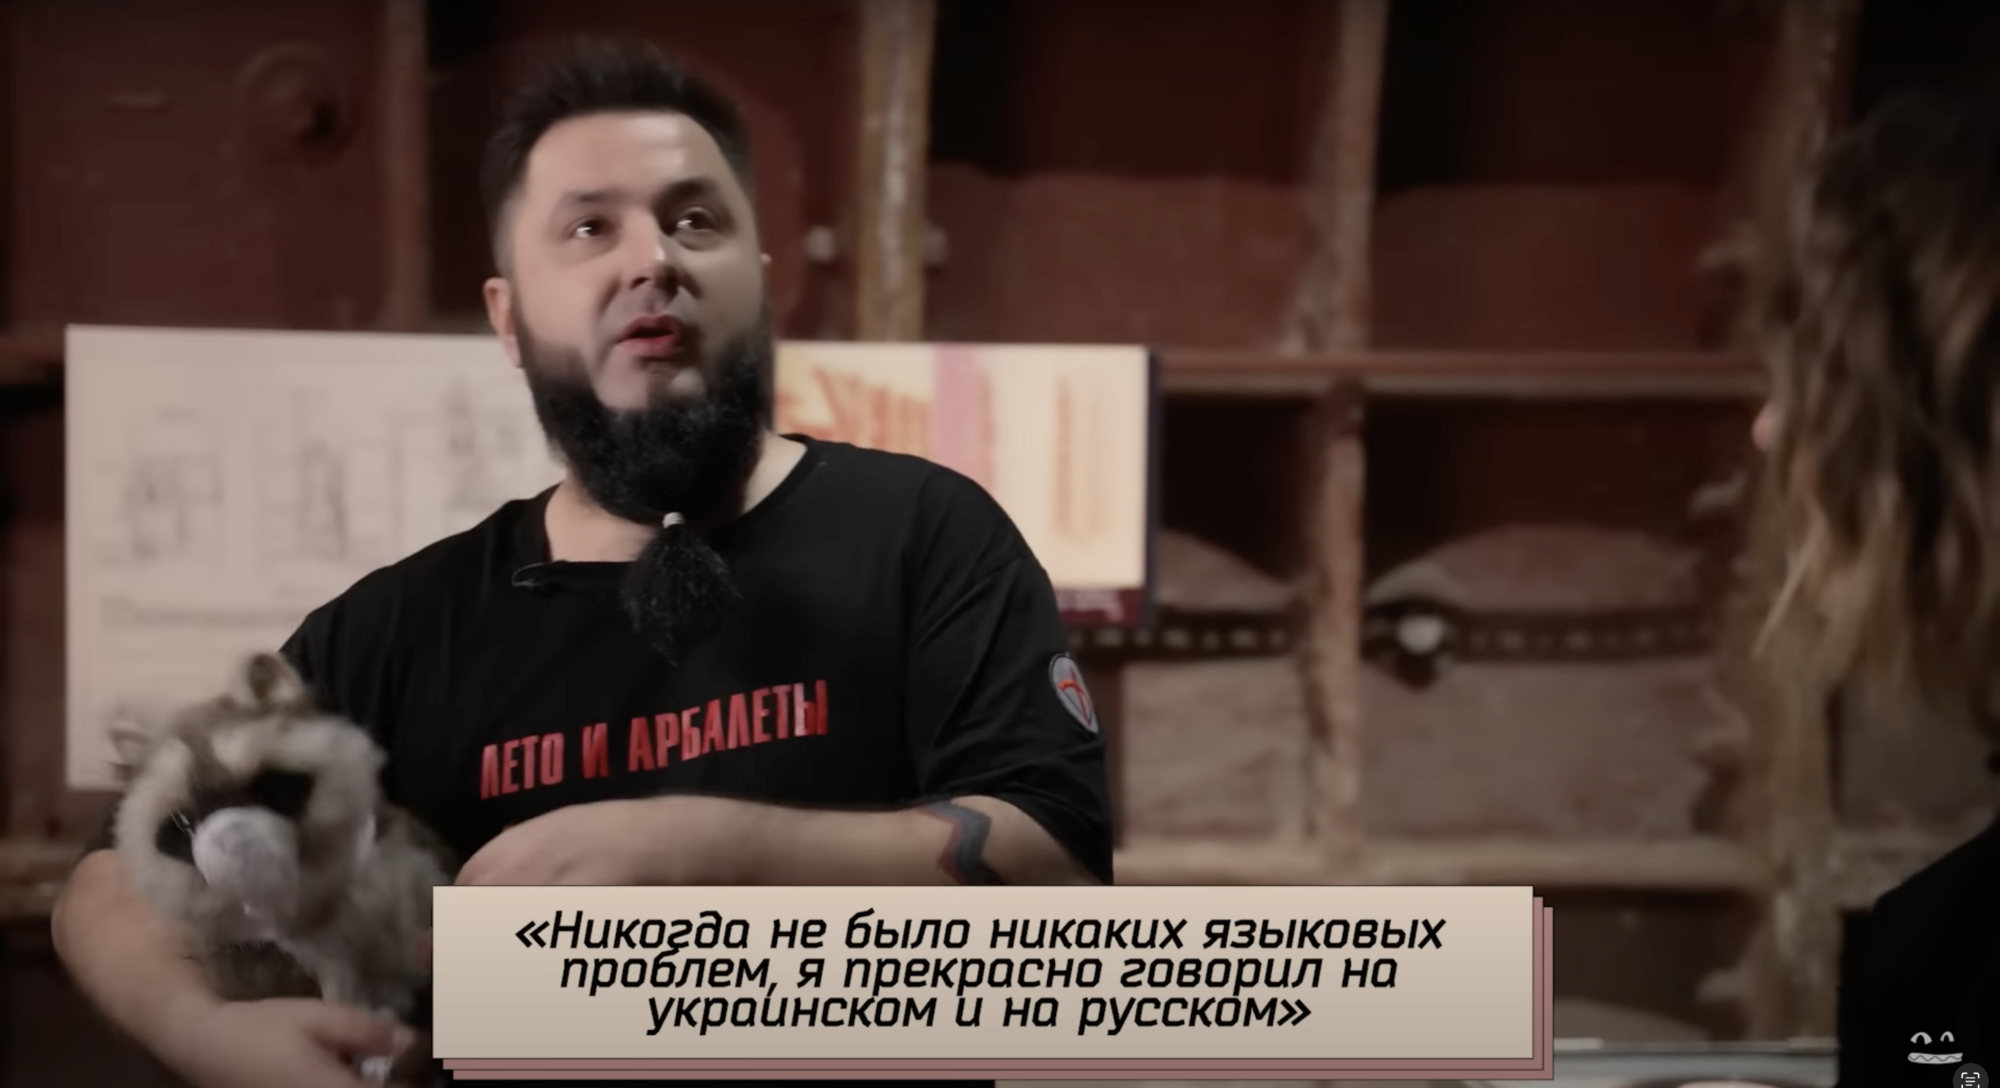 Mariupol native Akim Apachev denied the main myth of Russian propaganda in an interview with Sobchak, but ''hit out'' at western Ukraine